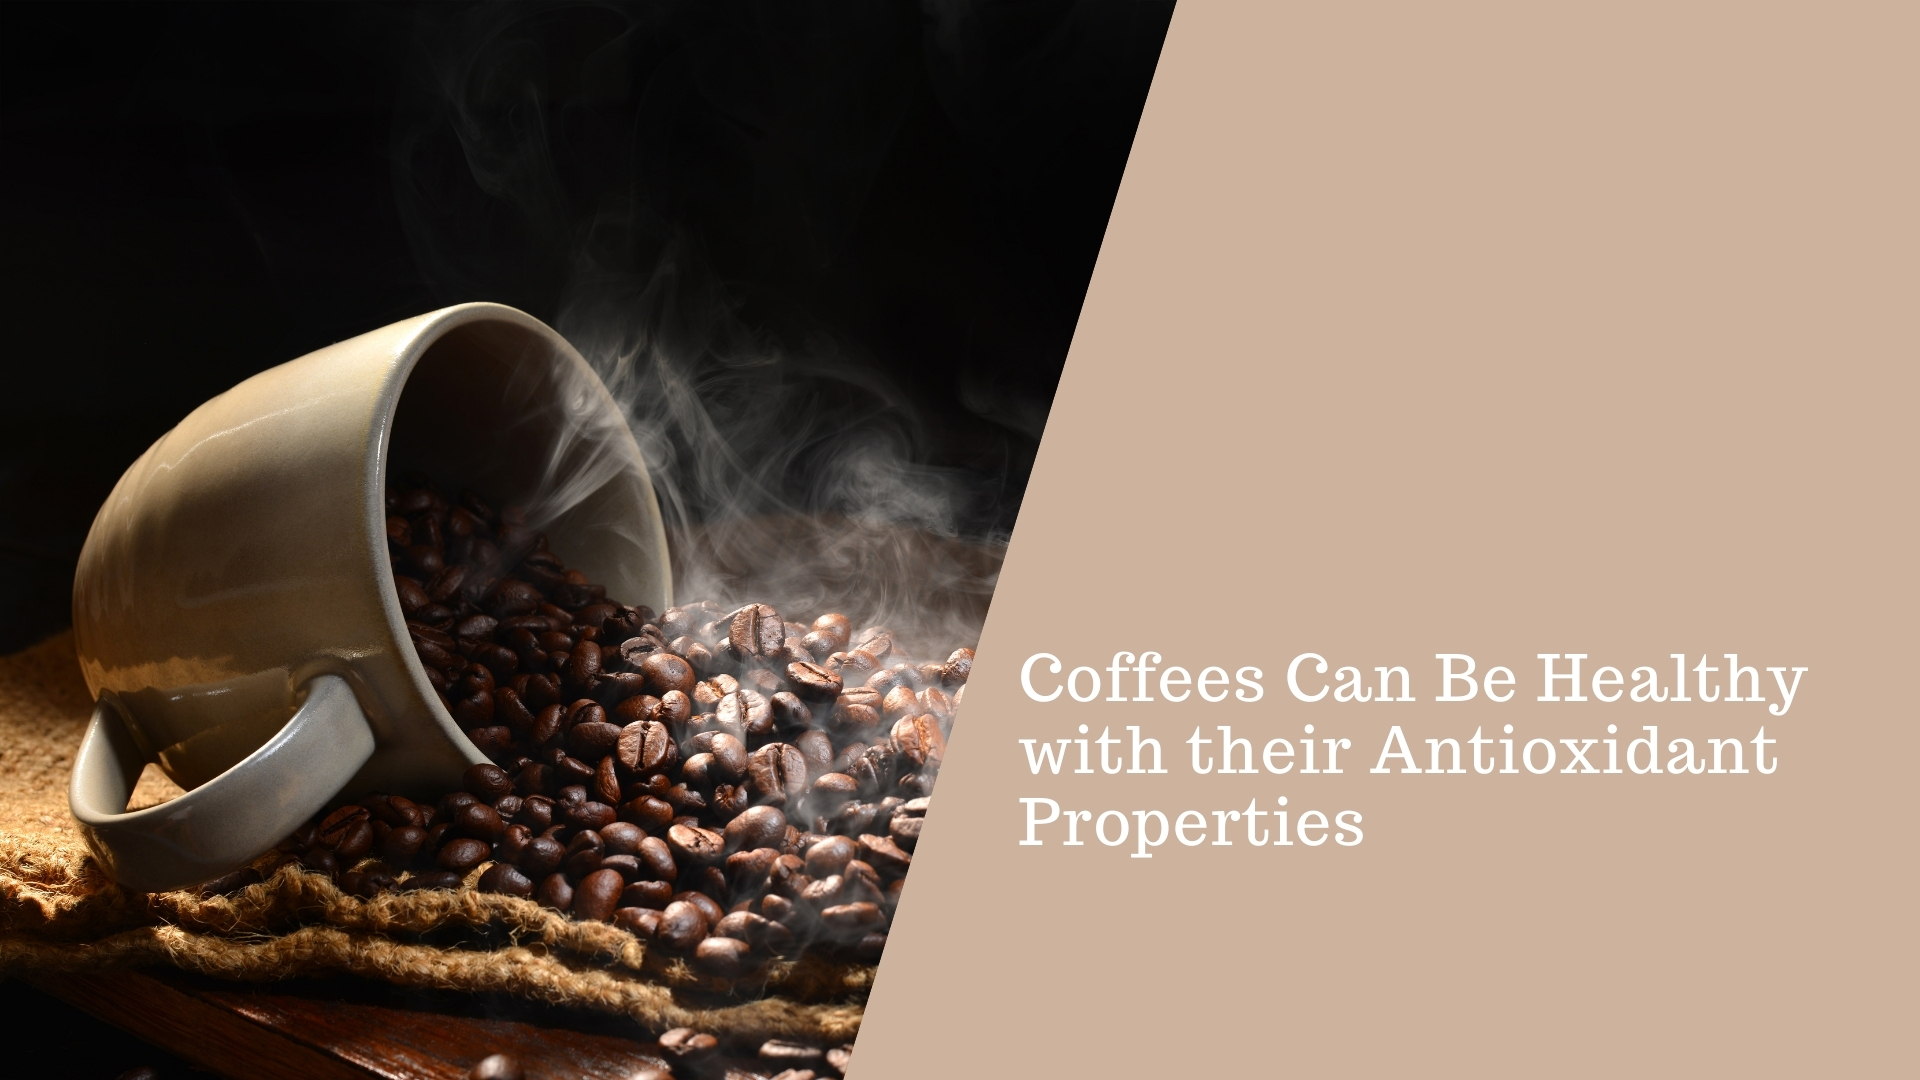 Coffees Can Be Healthy with their Antioxidant Properties